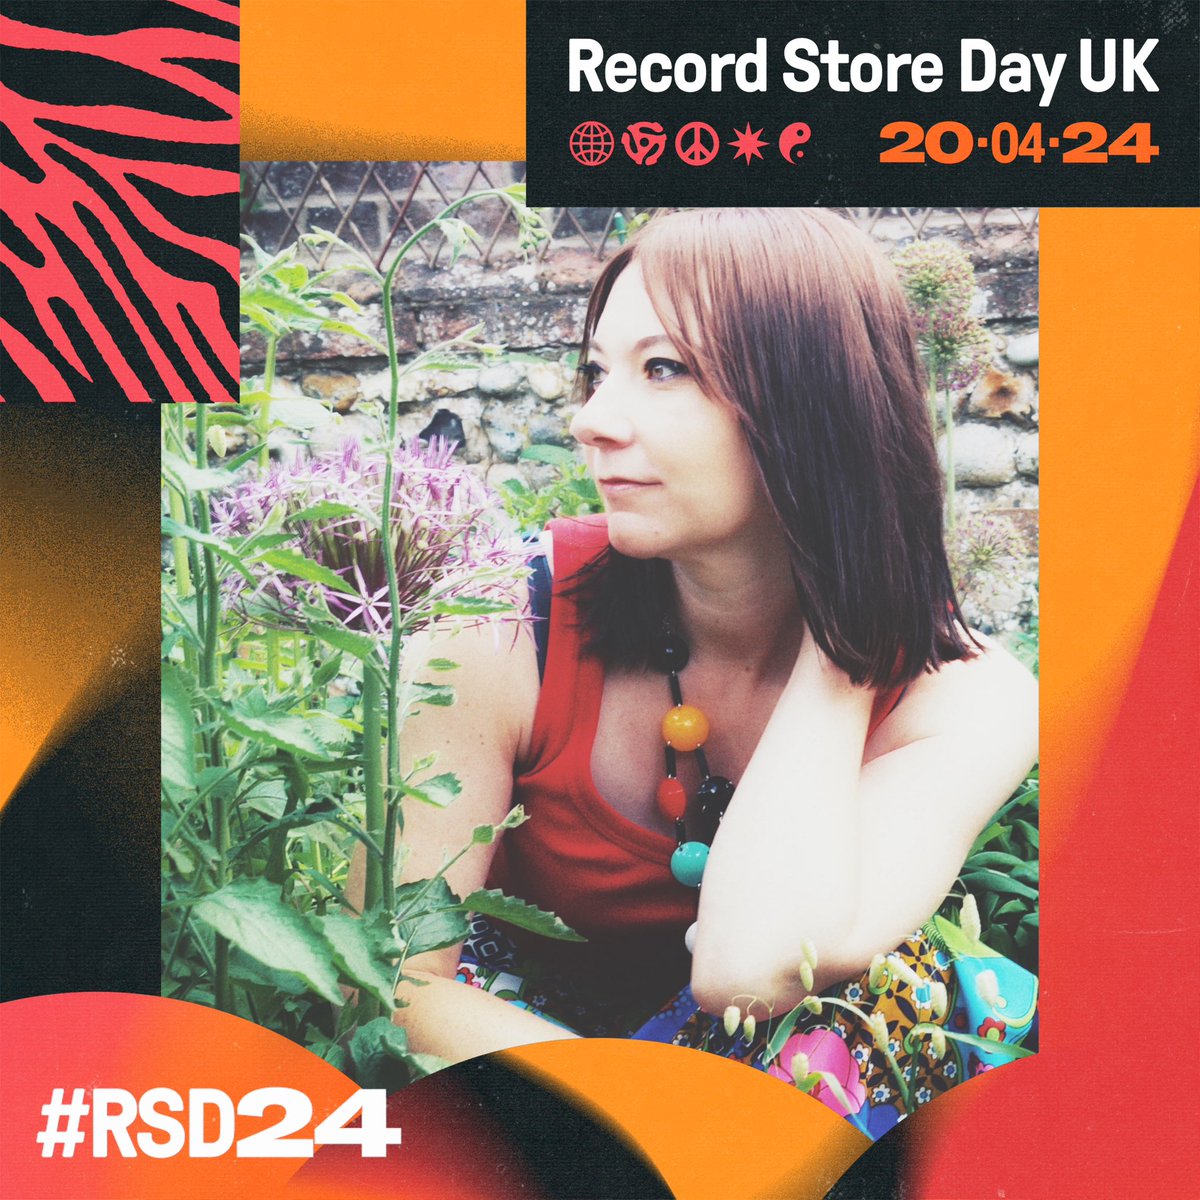 I'm excited to announce my upcoming 4 track EP, The Komiza Project, will be released exclusively on 12' vinyl for Record Store Day 2024 @recordstoreday 😁 @ShellshockLtd #Recordstoreday